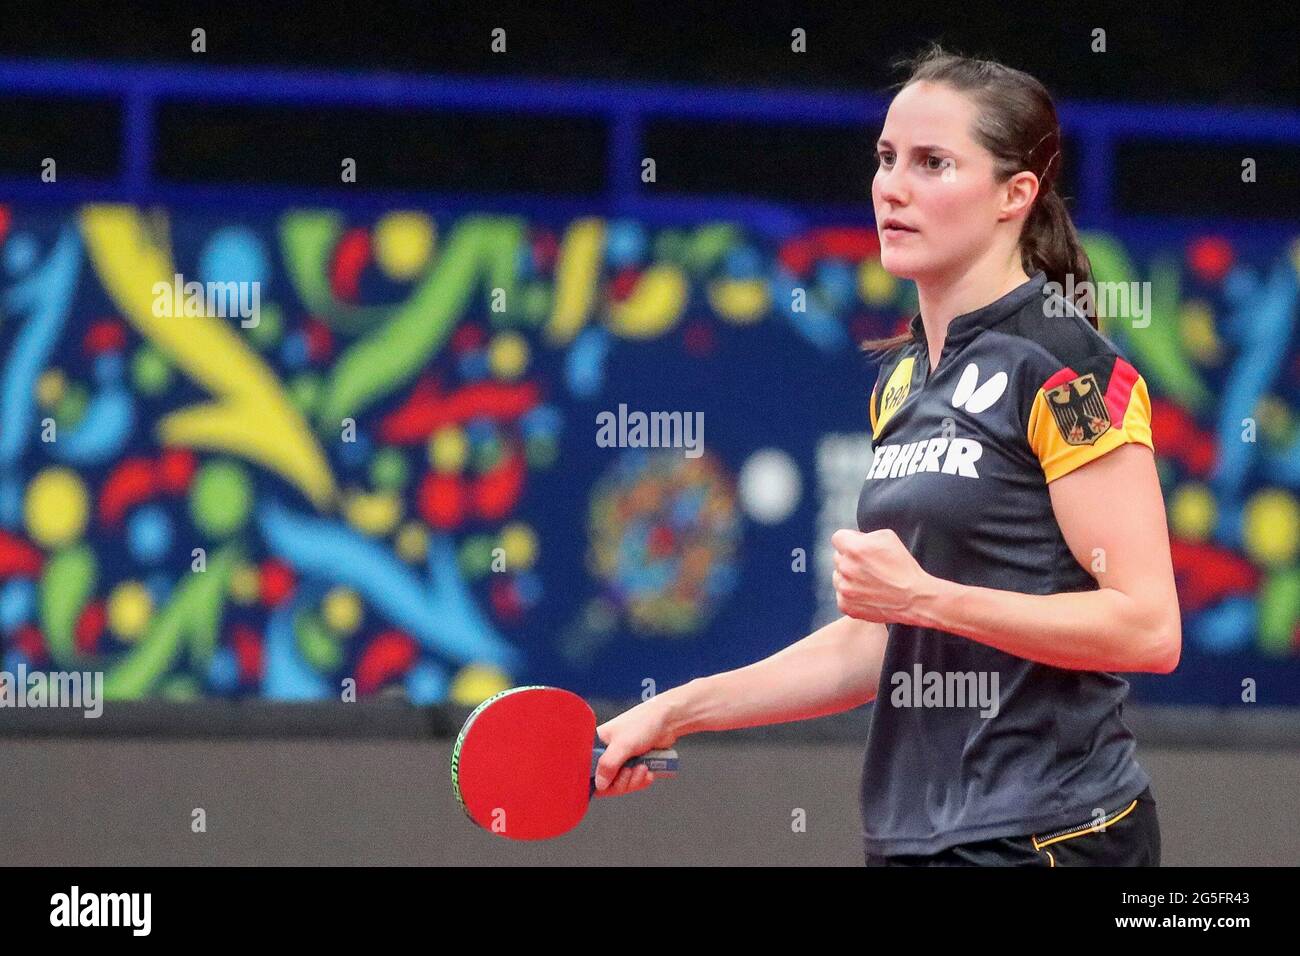 firo: 26.06.2021 Table tennis, EM, European Championship, 2020, 2021 In,  Poland, Warsaw, 39th European Table Tennis Championship, women, women  SABINE WINTER, Germany our terms and conditions apply, can be viewed at  www.firosportphoto.de ¬